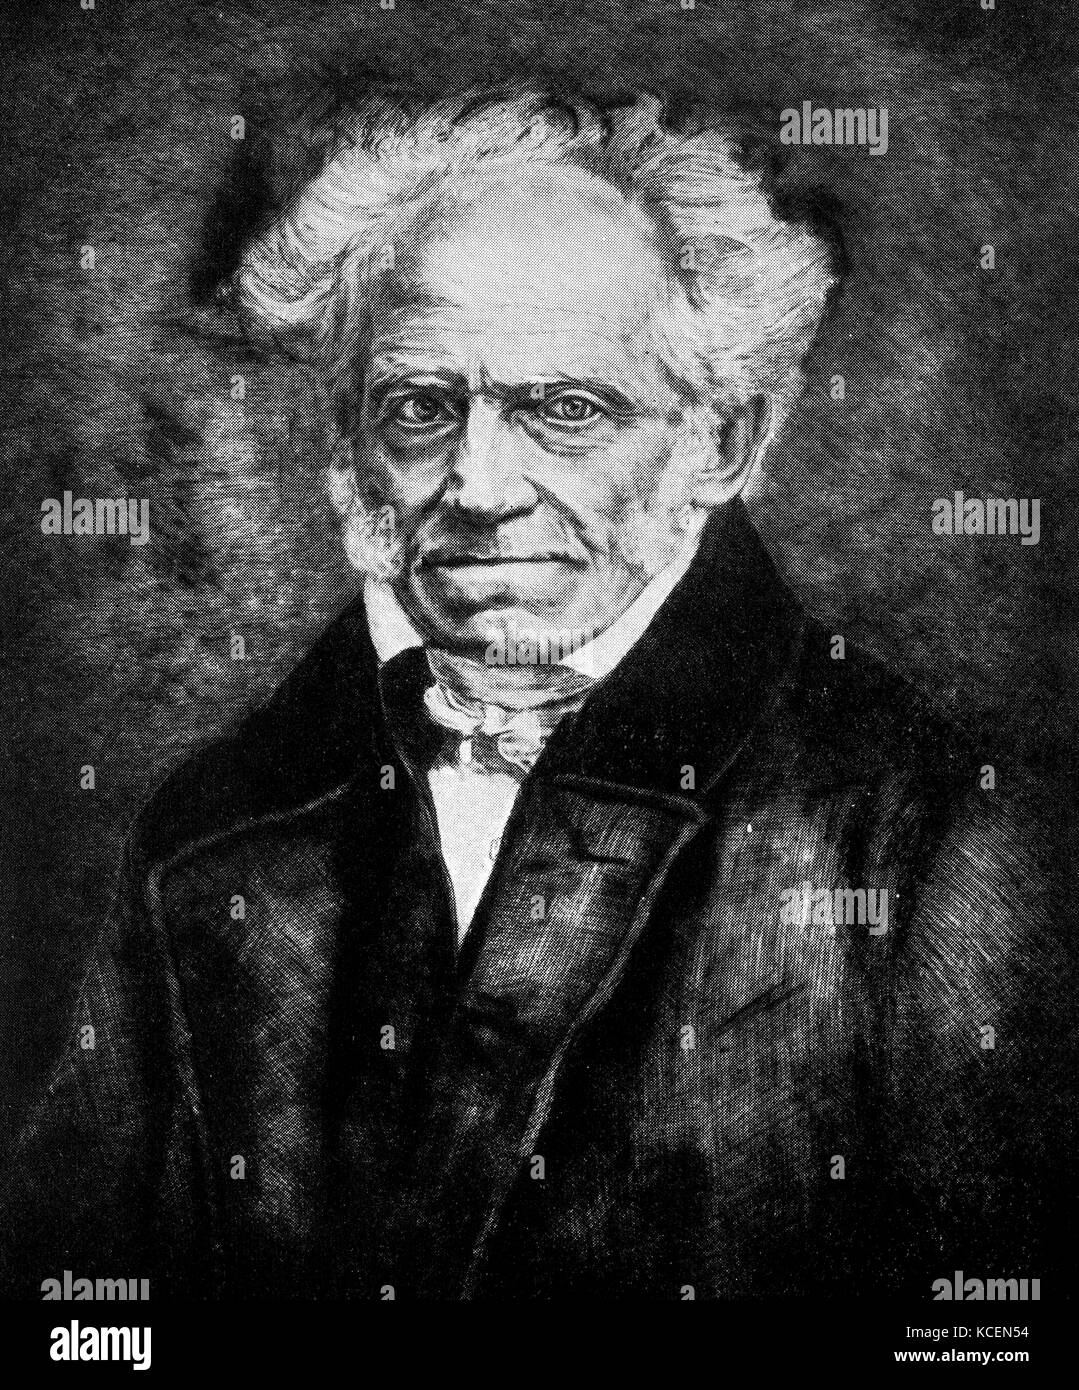 Arthur Schopenhauer (1788 – 1860) German philosopher. He is best known for his 1818 work The World as Will and Representation (expanded in 1844), Stock Photo